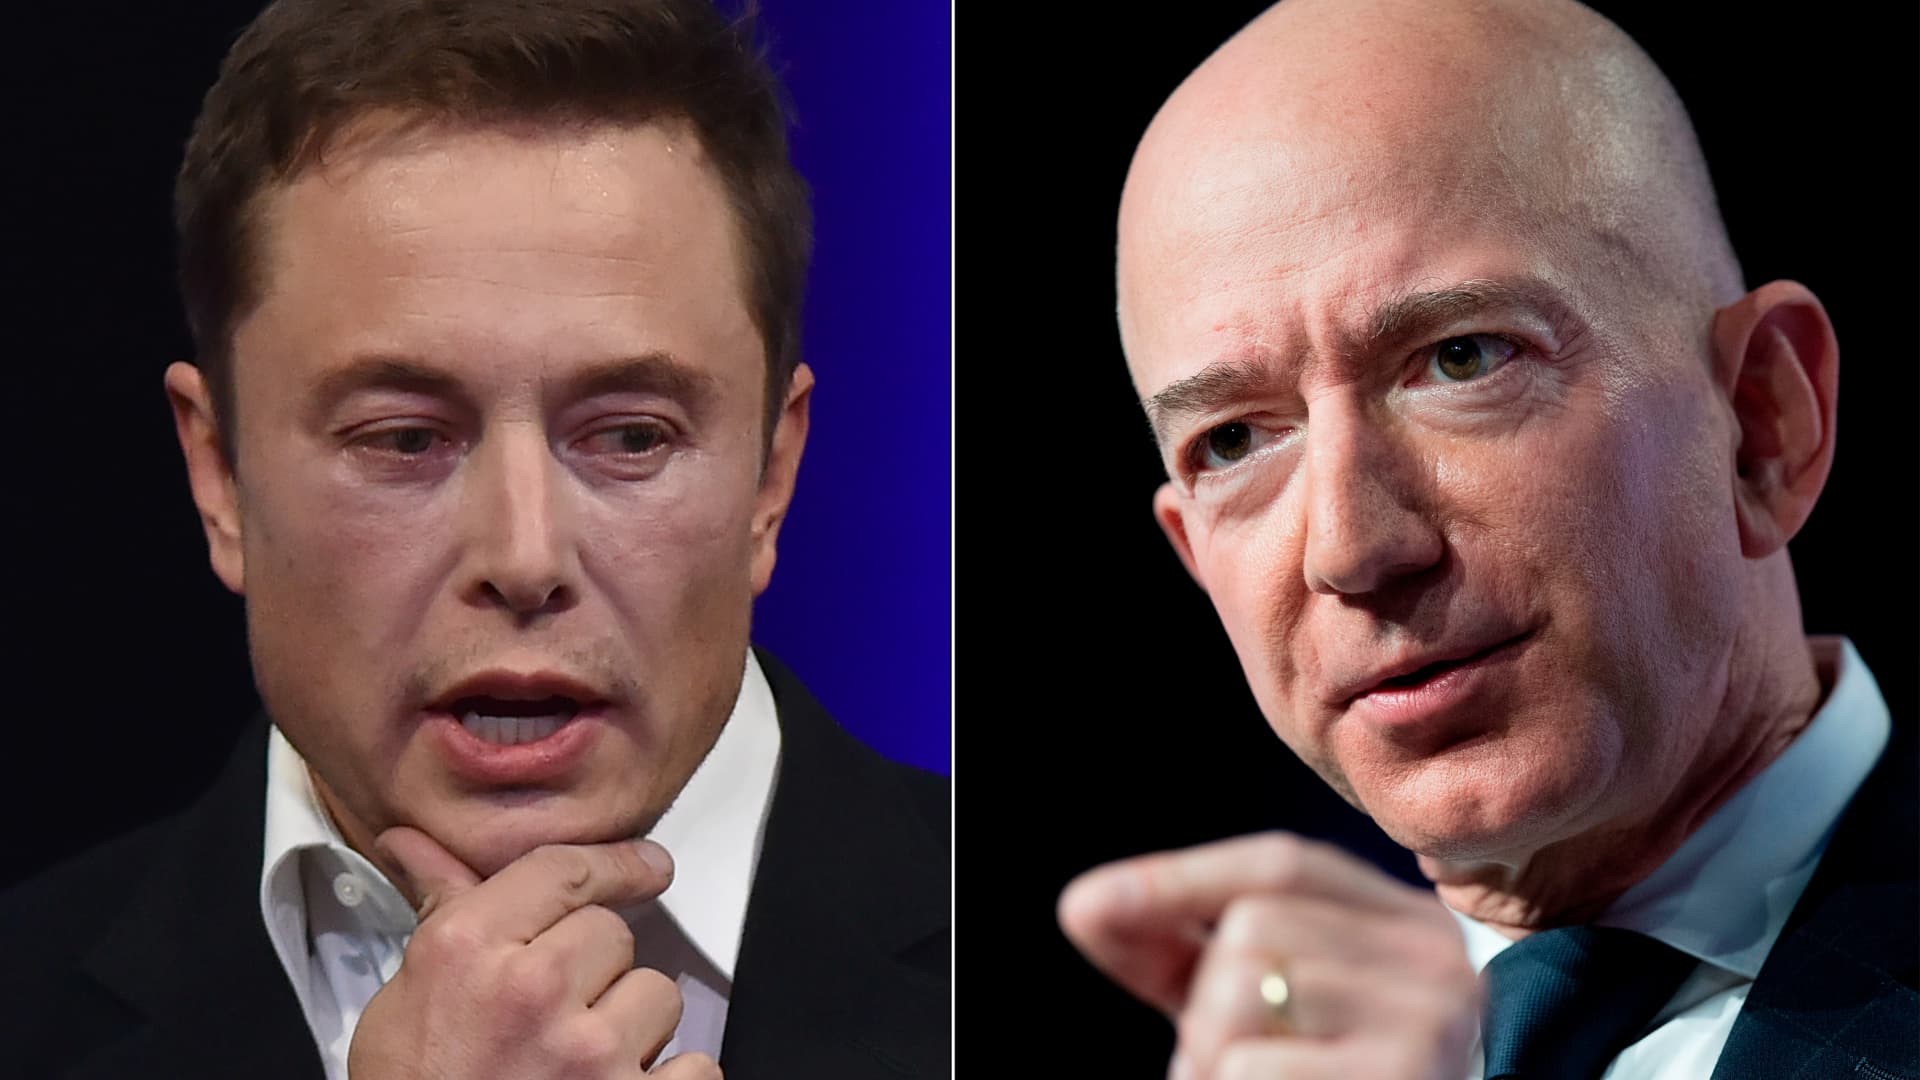 Bezos snubbed Musk’s SpaceX for huge satellite launch contract, Amazon shareholder says